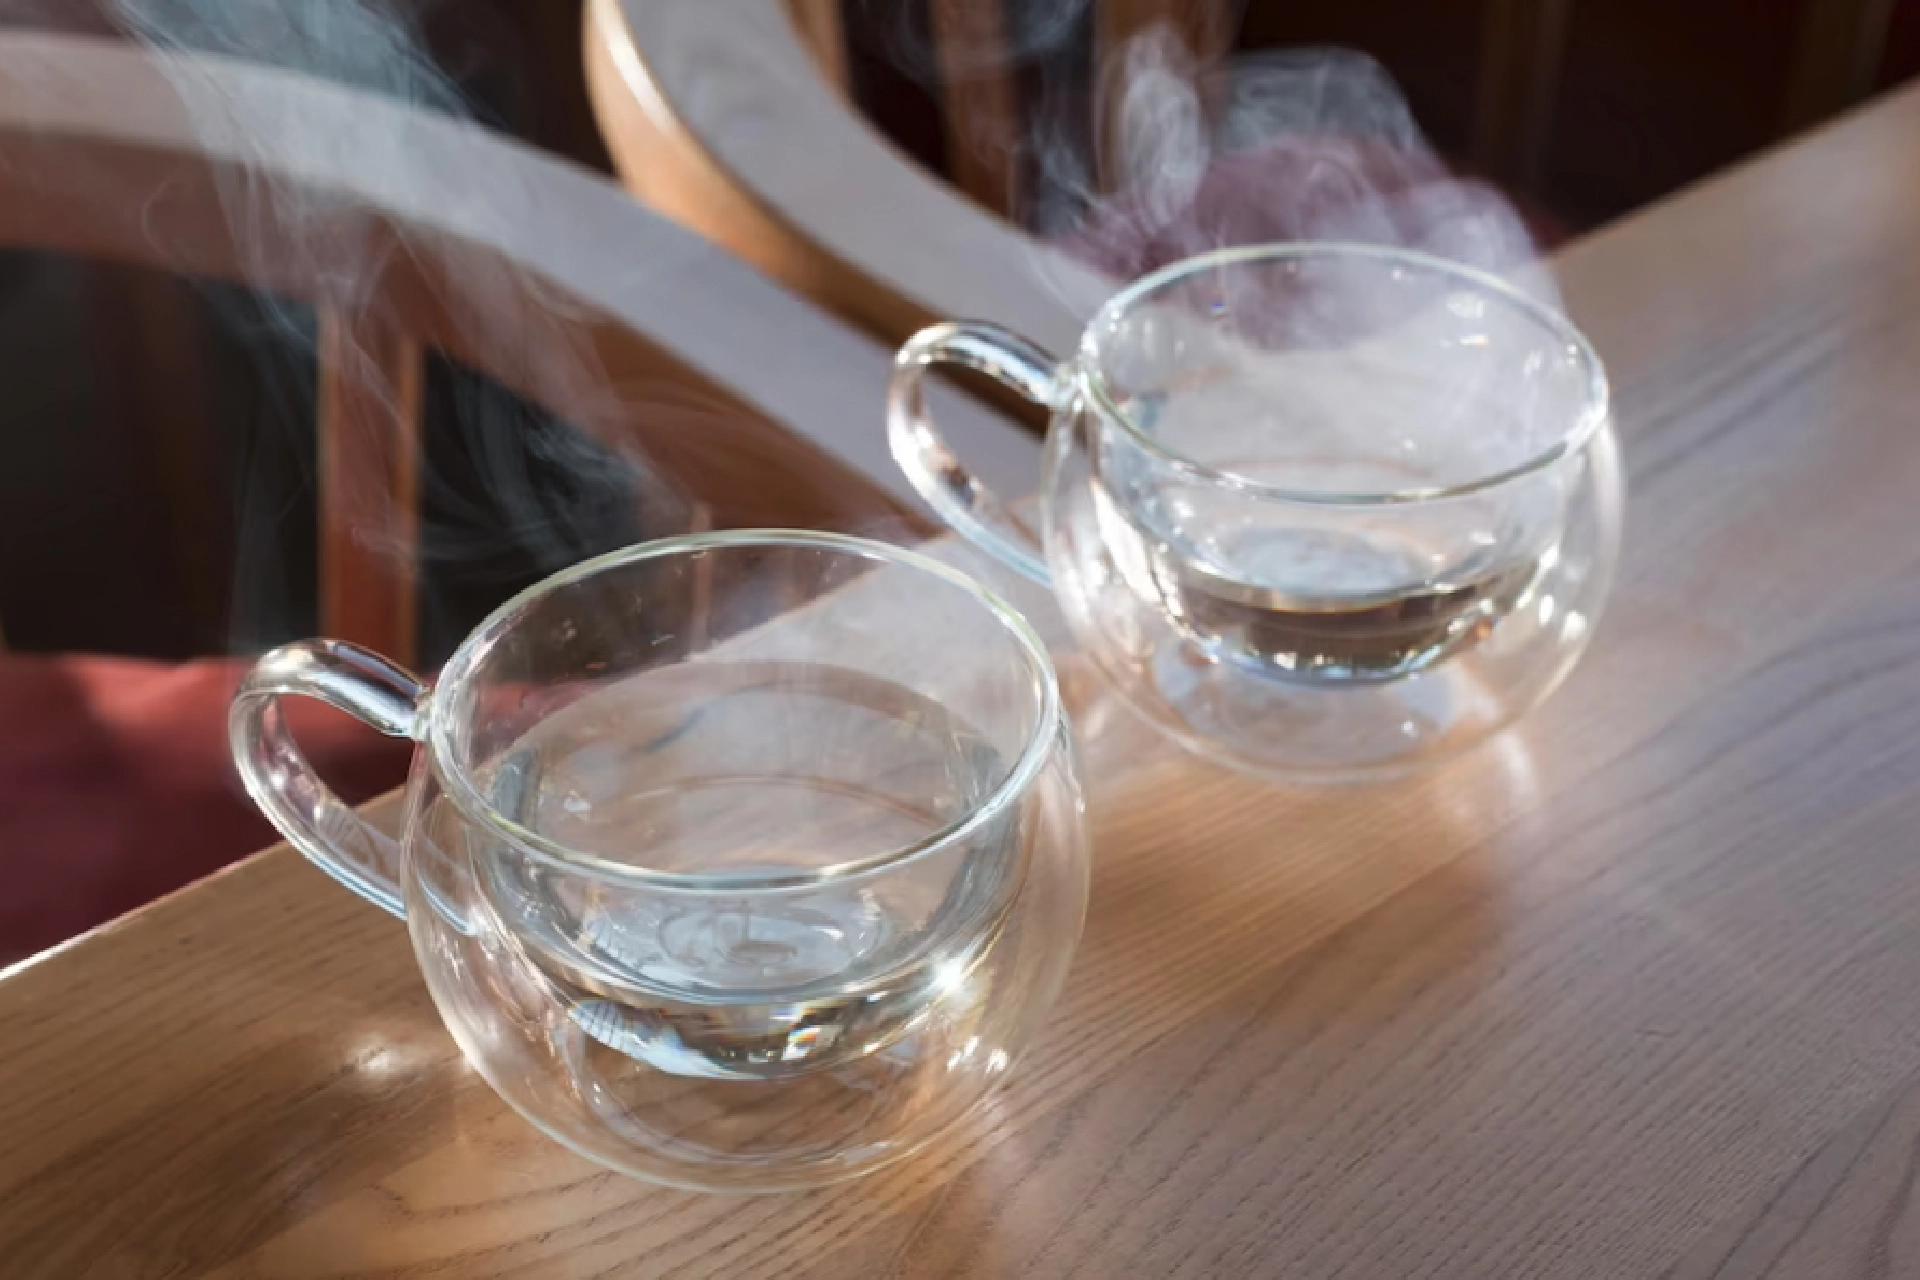 Discover the 10 Surprising Health Benefits of Drinking Hot Water